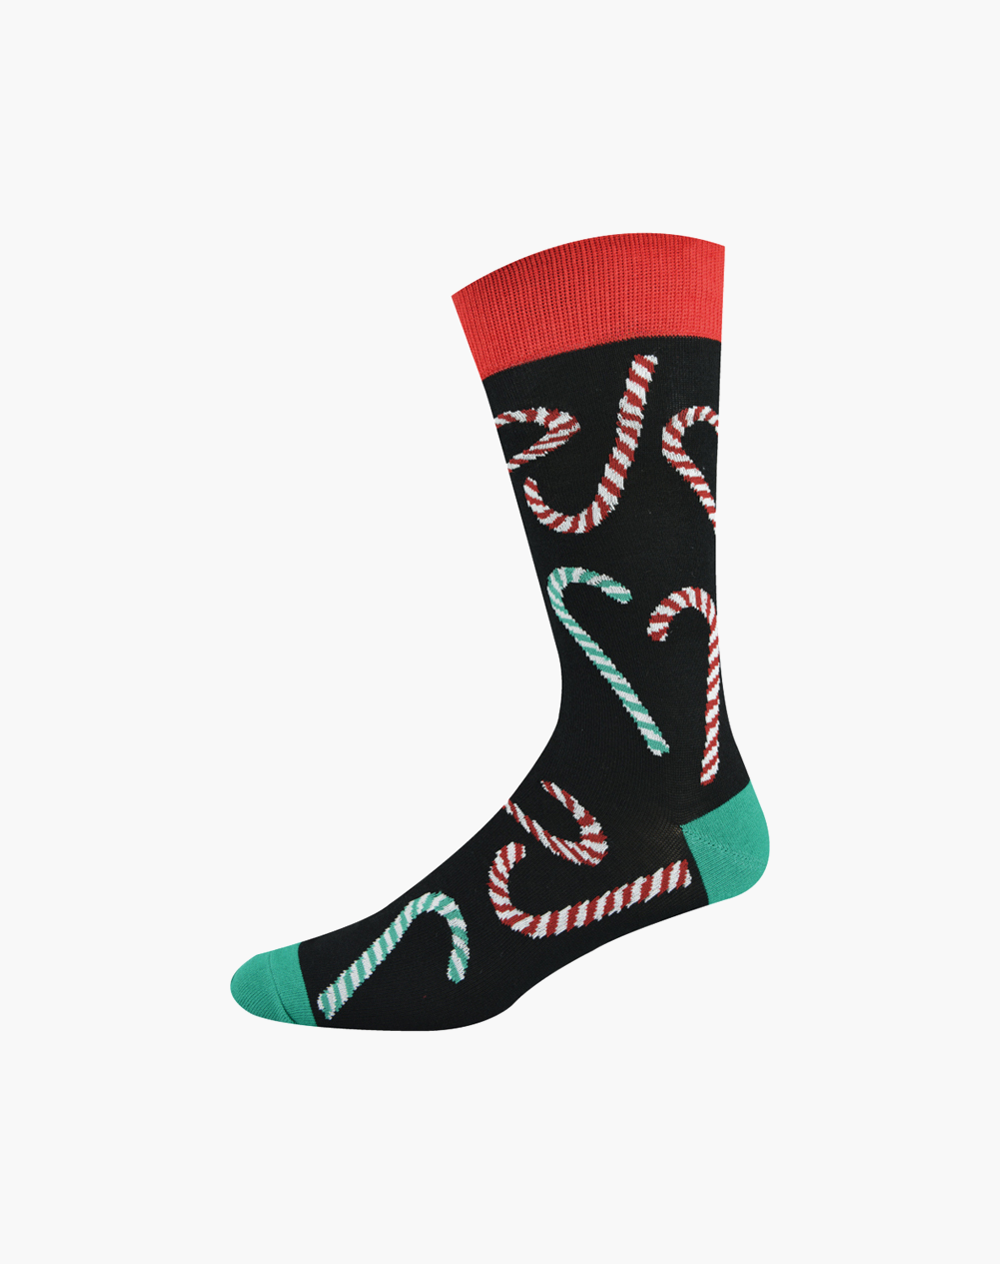 MENS CANDY CANE BAMBOO SOCK